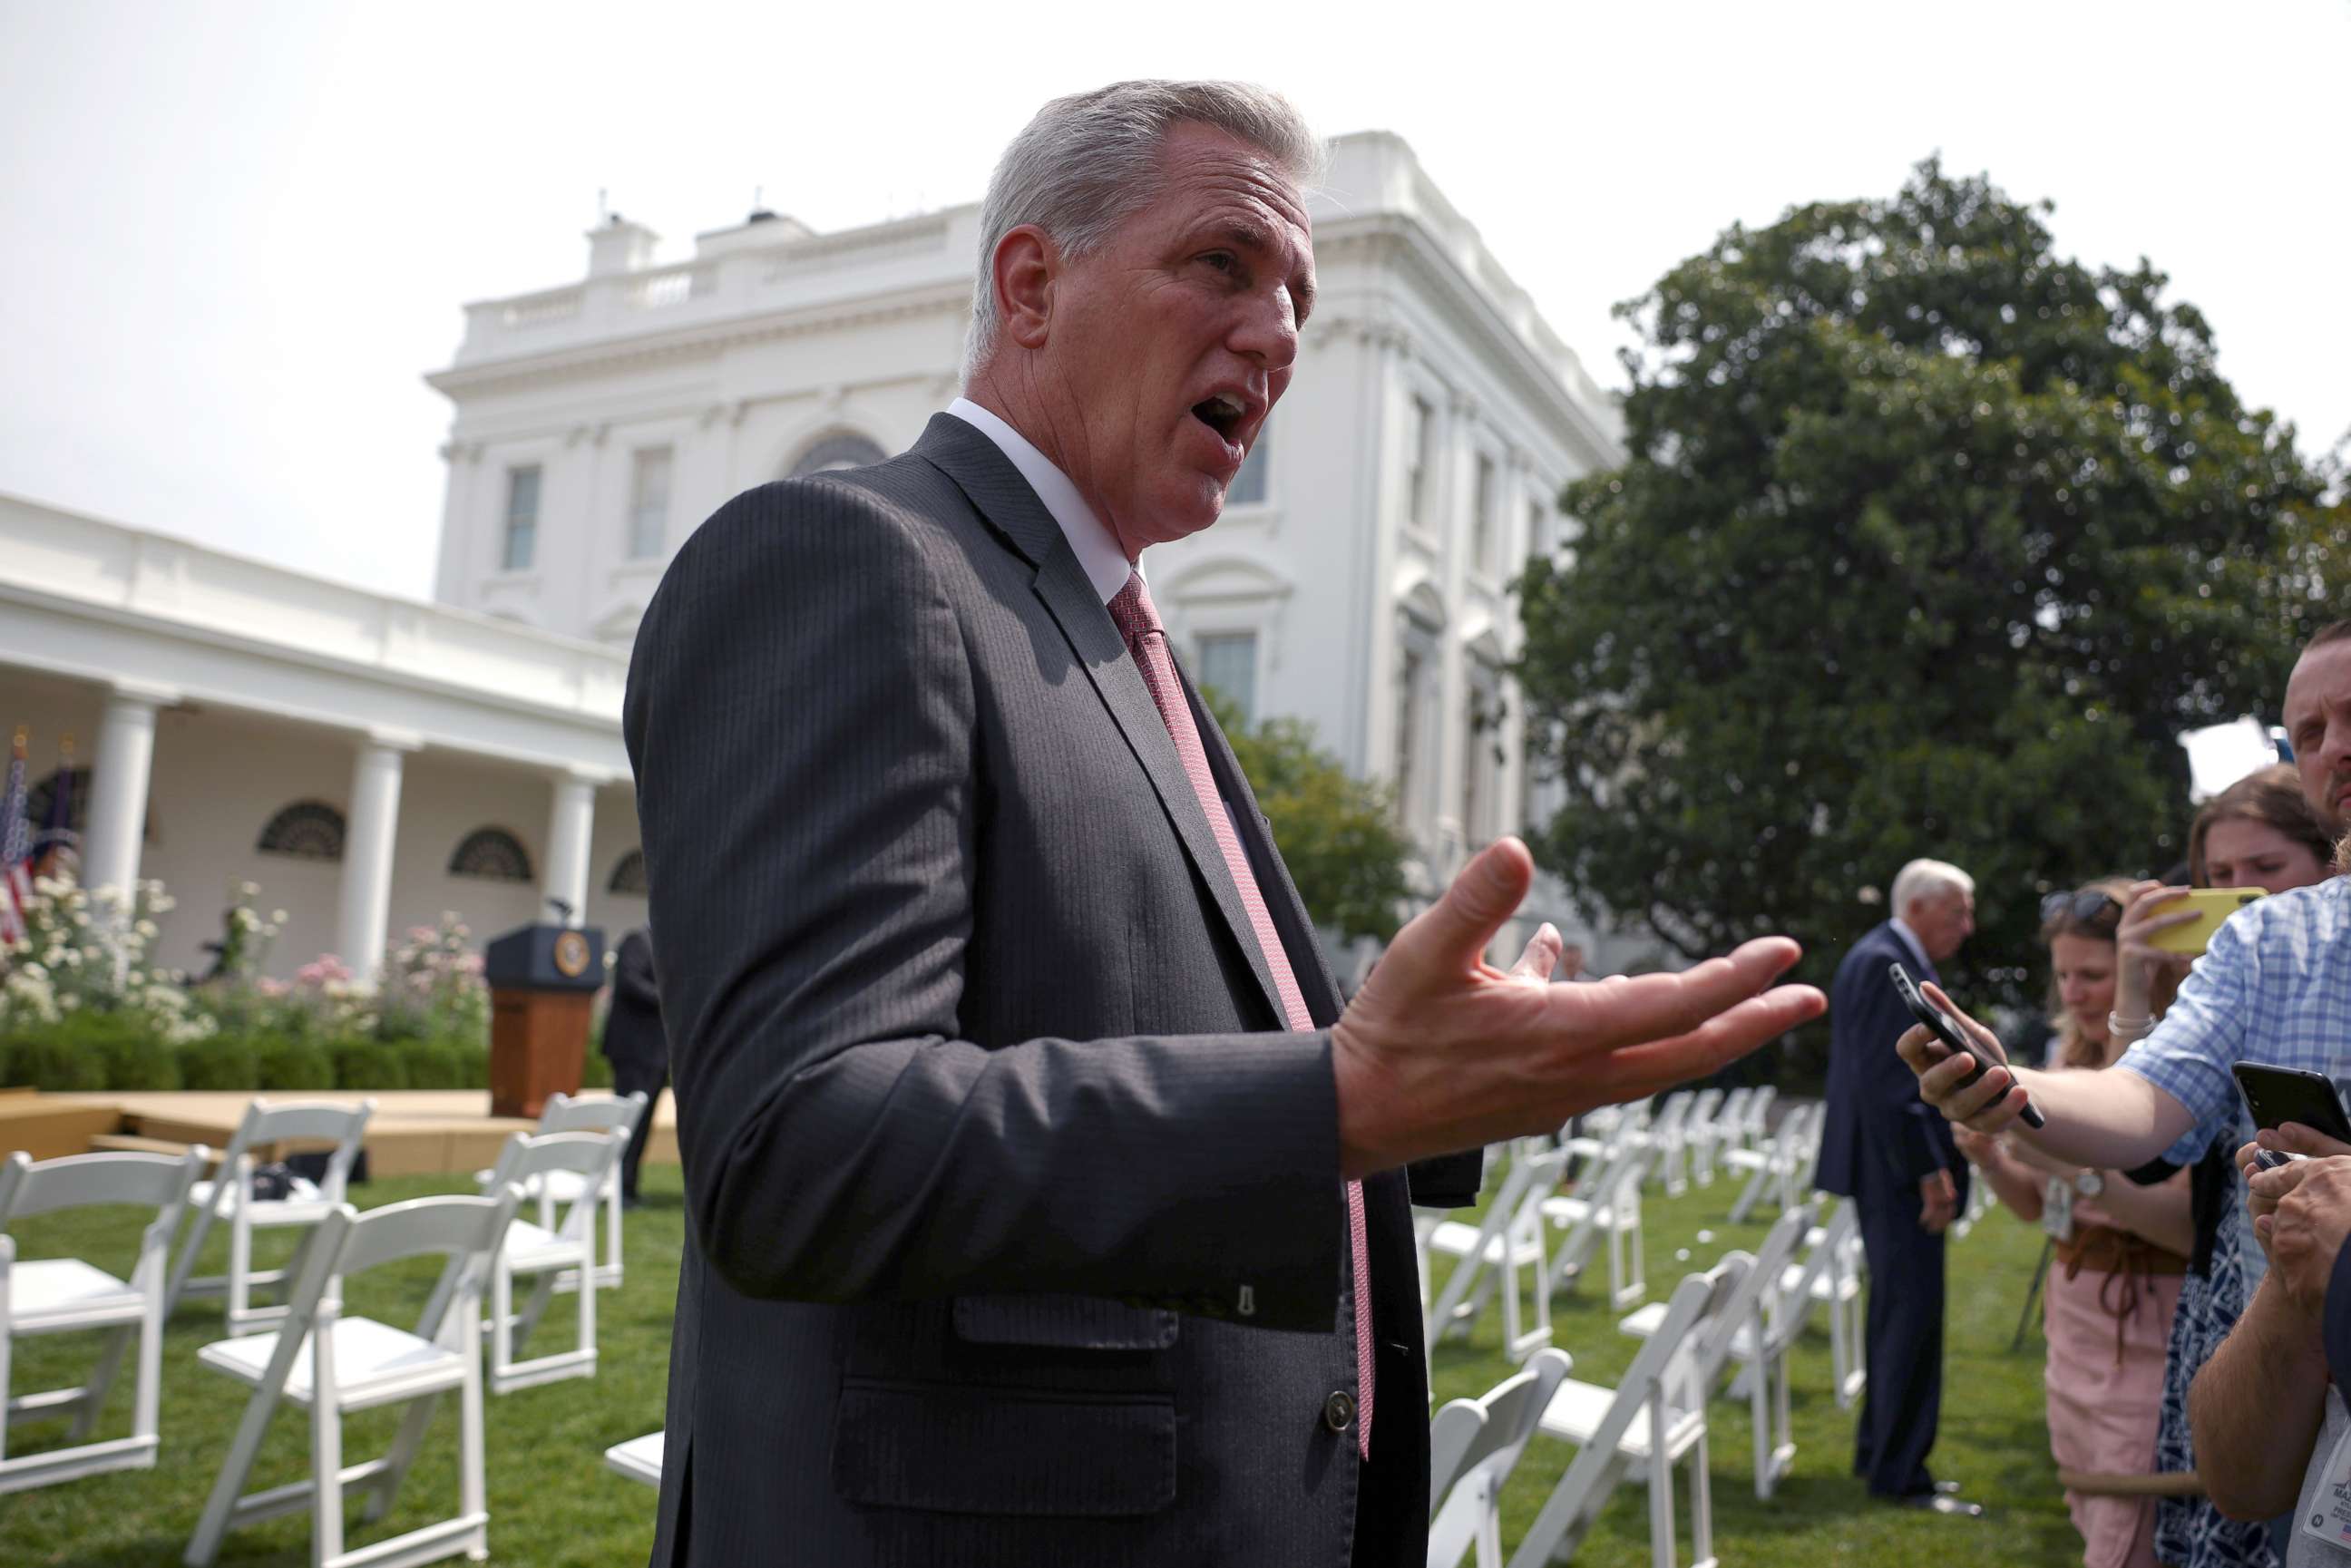 PHOTO: House Minority Leader Kevin McCarthy speaks to reporters before a ceremony to mark the 31st anniversary of the Americans with Disabilities Act (ADA) in the Rose Garden of the White House on July 26, 2021 in Washington, DC.